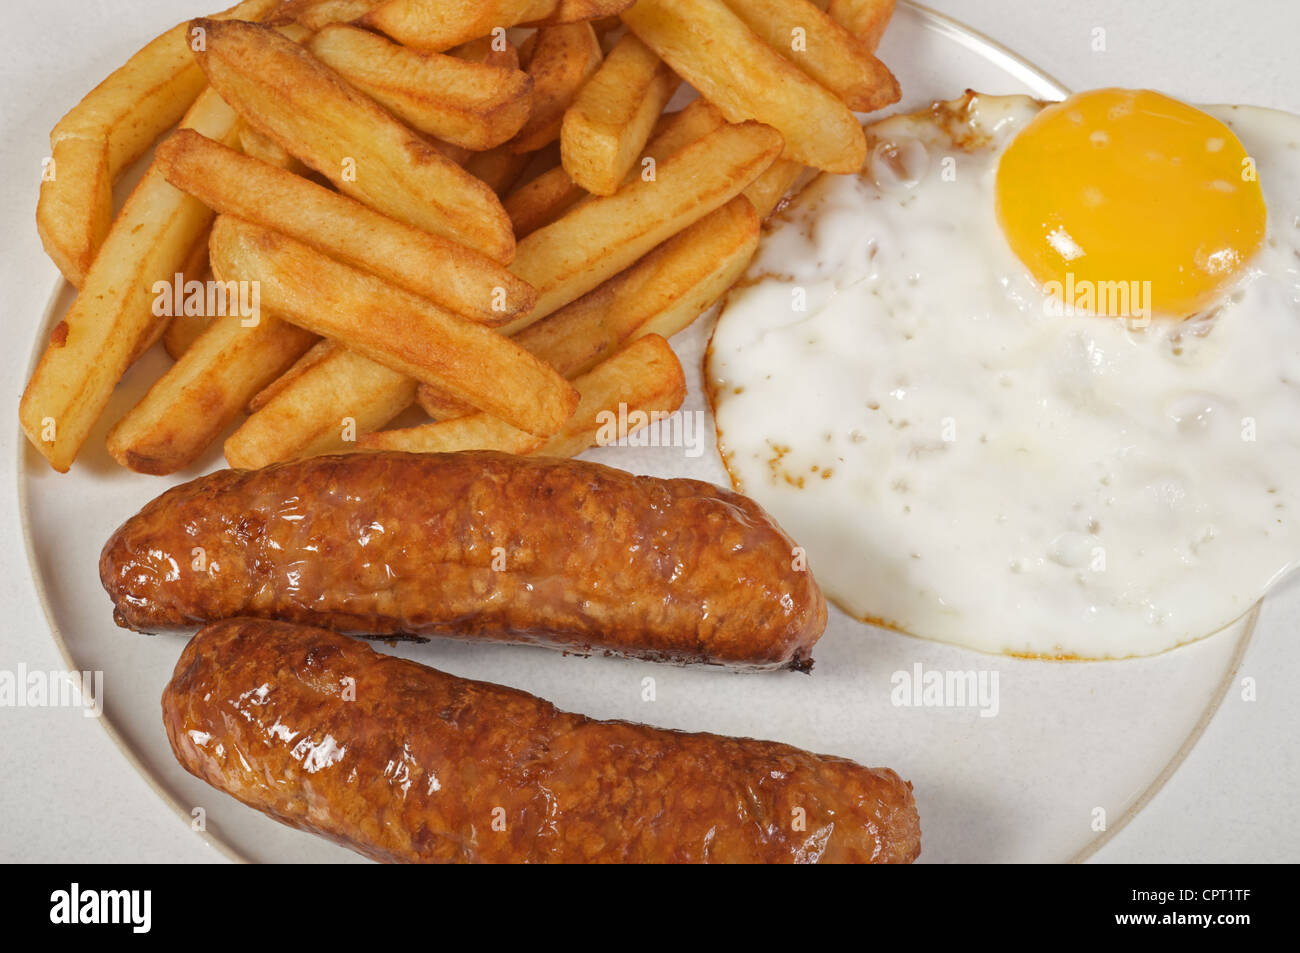 Sausage, egg and chips Stock Photo